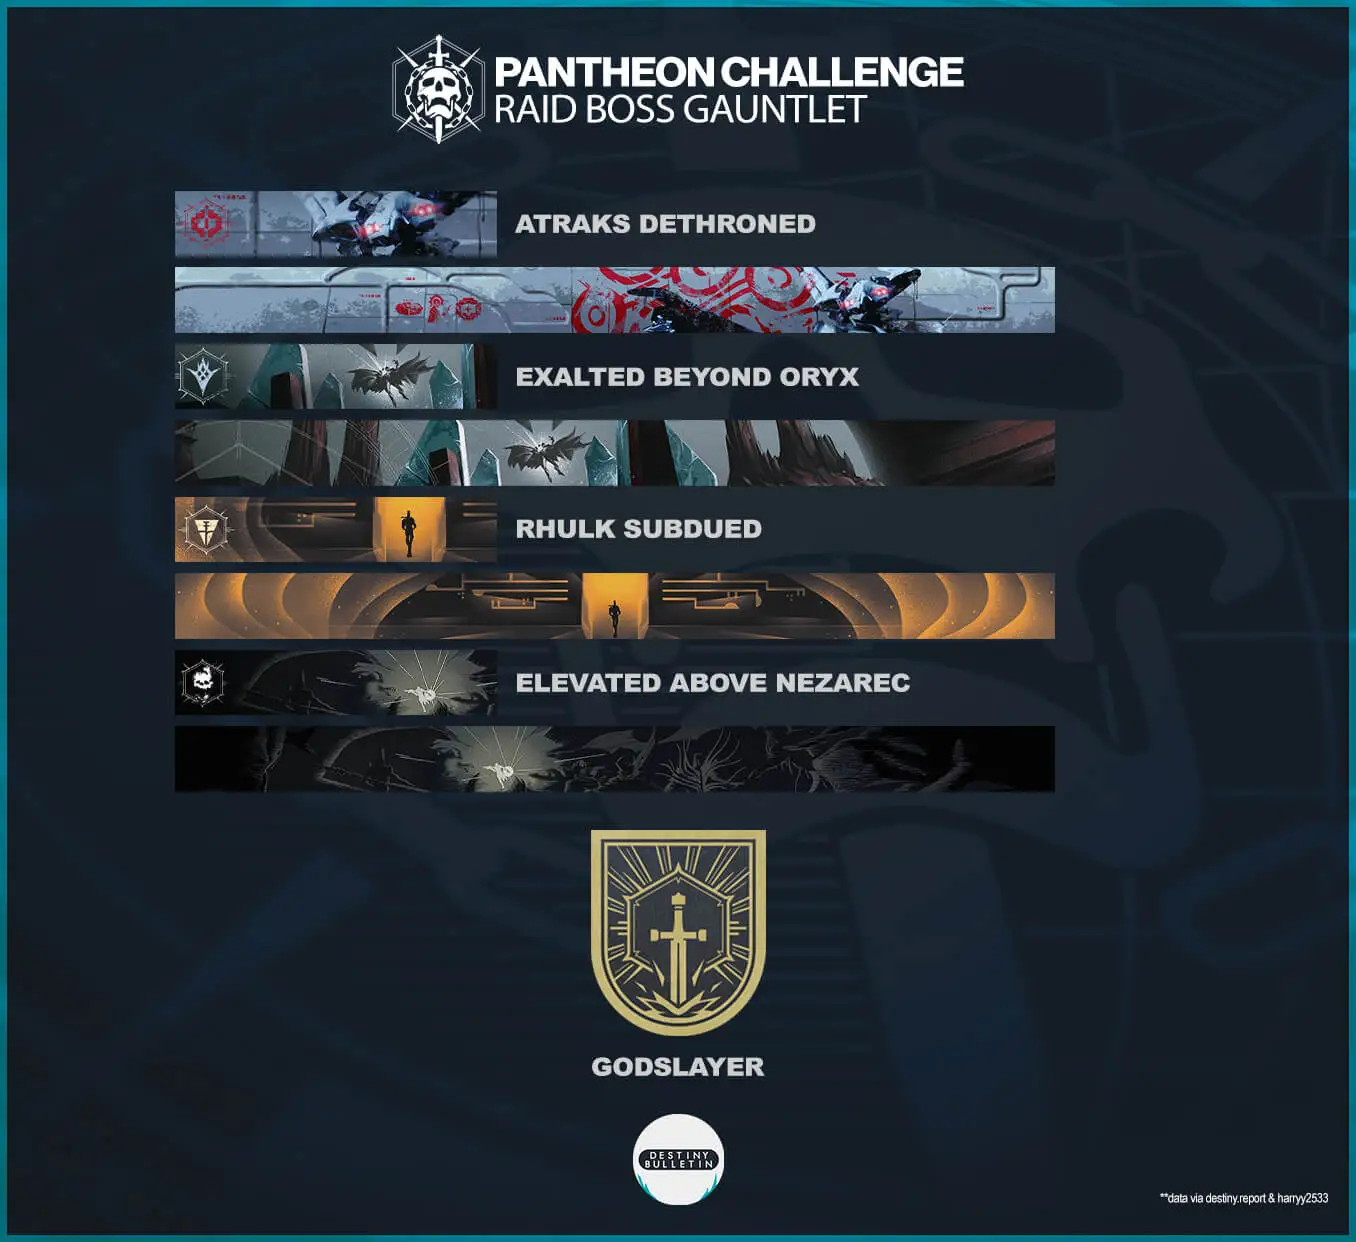 Destiny 2 Pantheon Challenge: Encounters, Rewards, Seal, and More